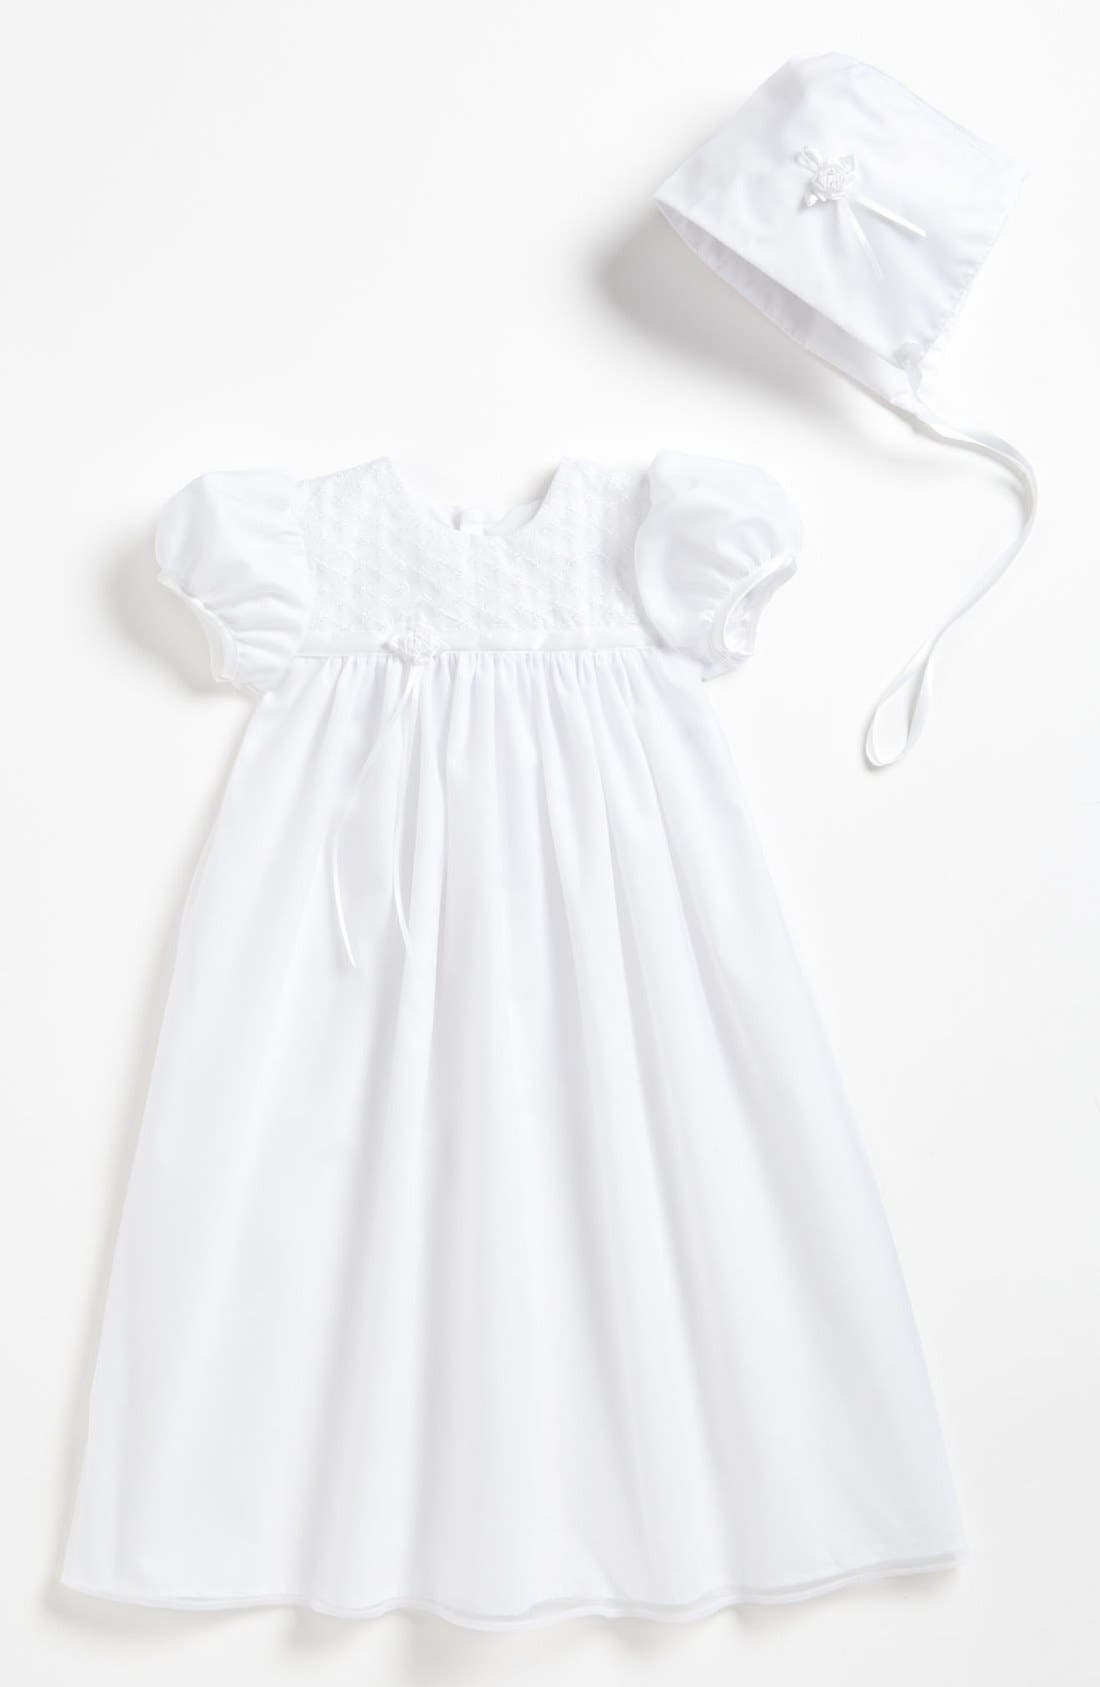 embroidered baby gowns